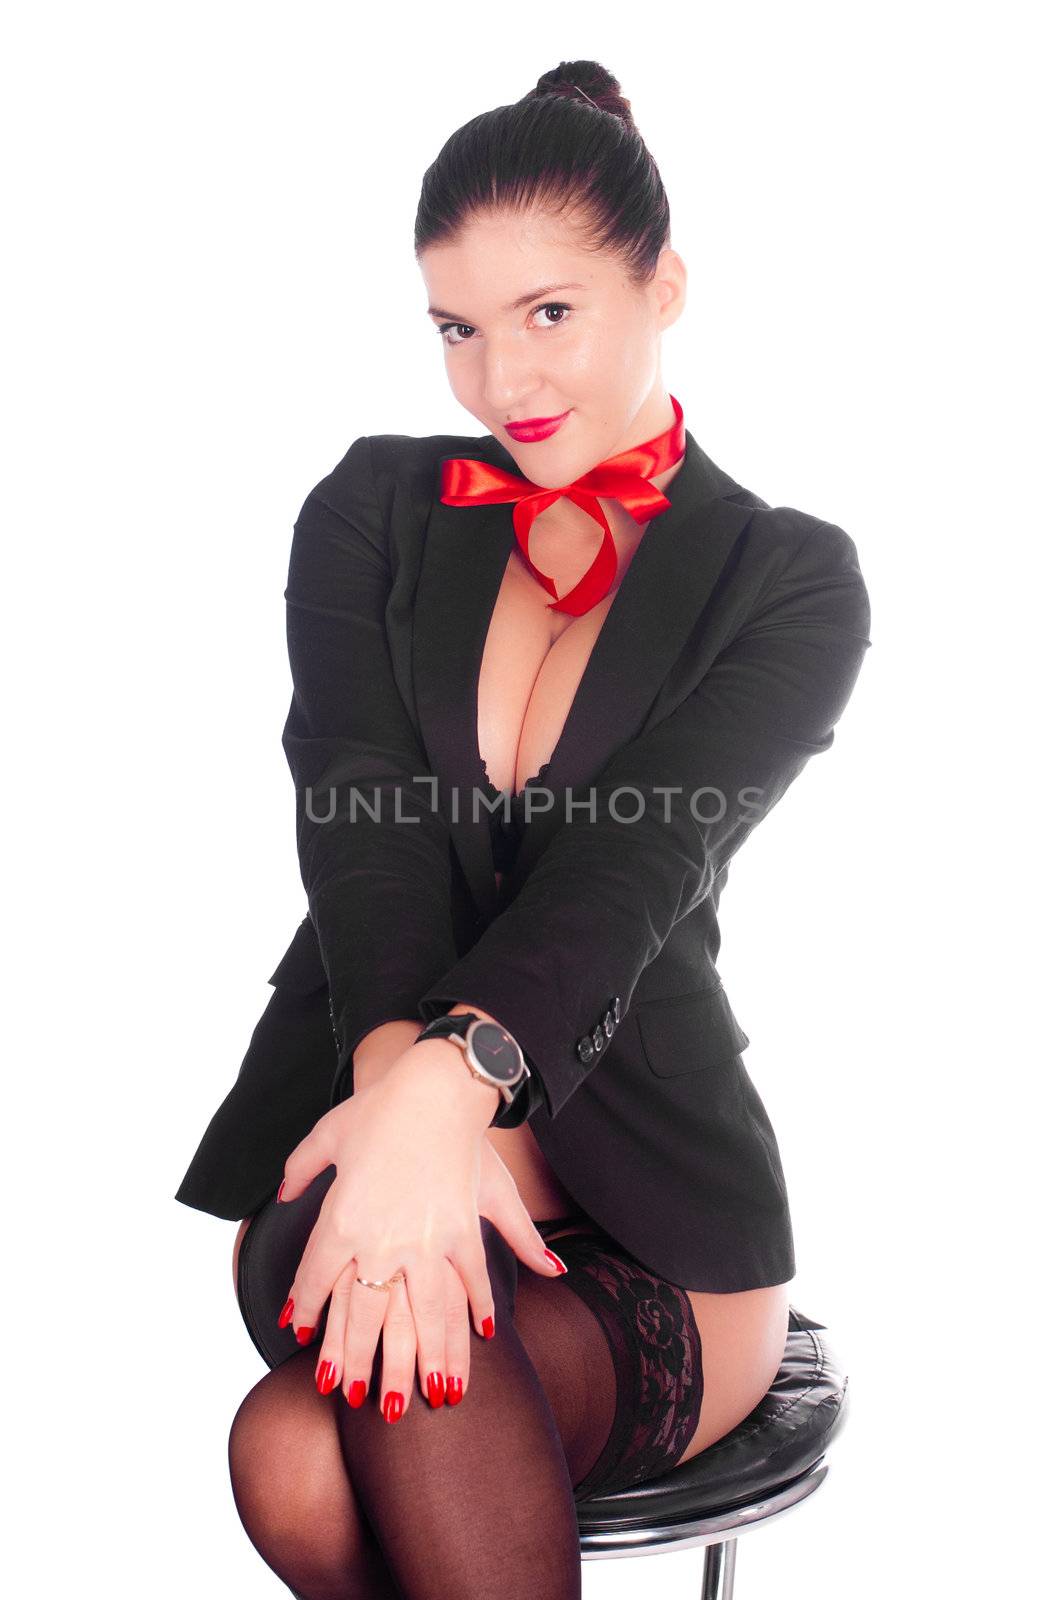 The beautiful sexy girl sits on a bar chair in stockings and a black jacket with a red bow on her neck